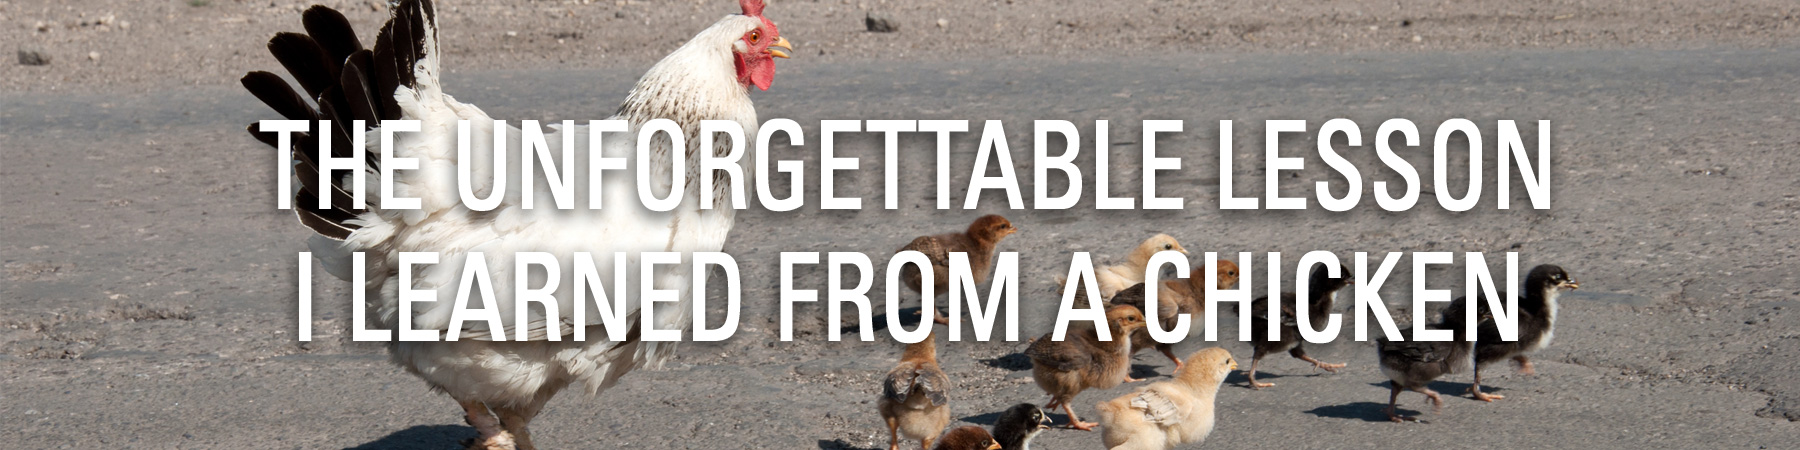 The Unforgettable Lesson I Learned From a Chicken